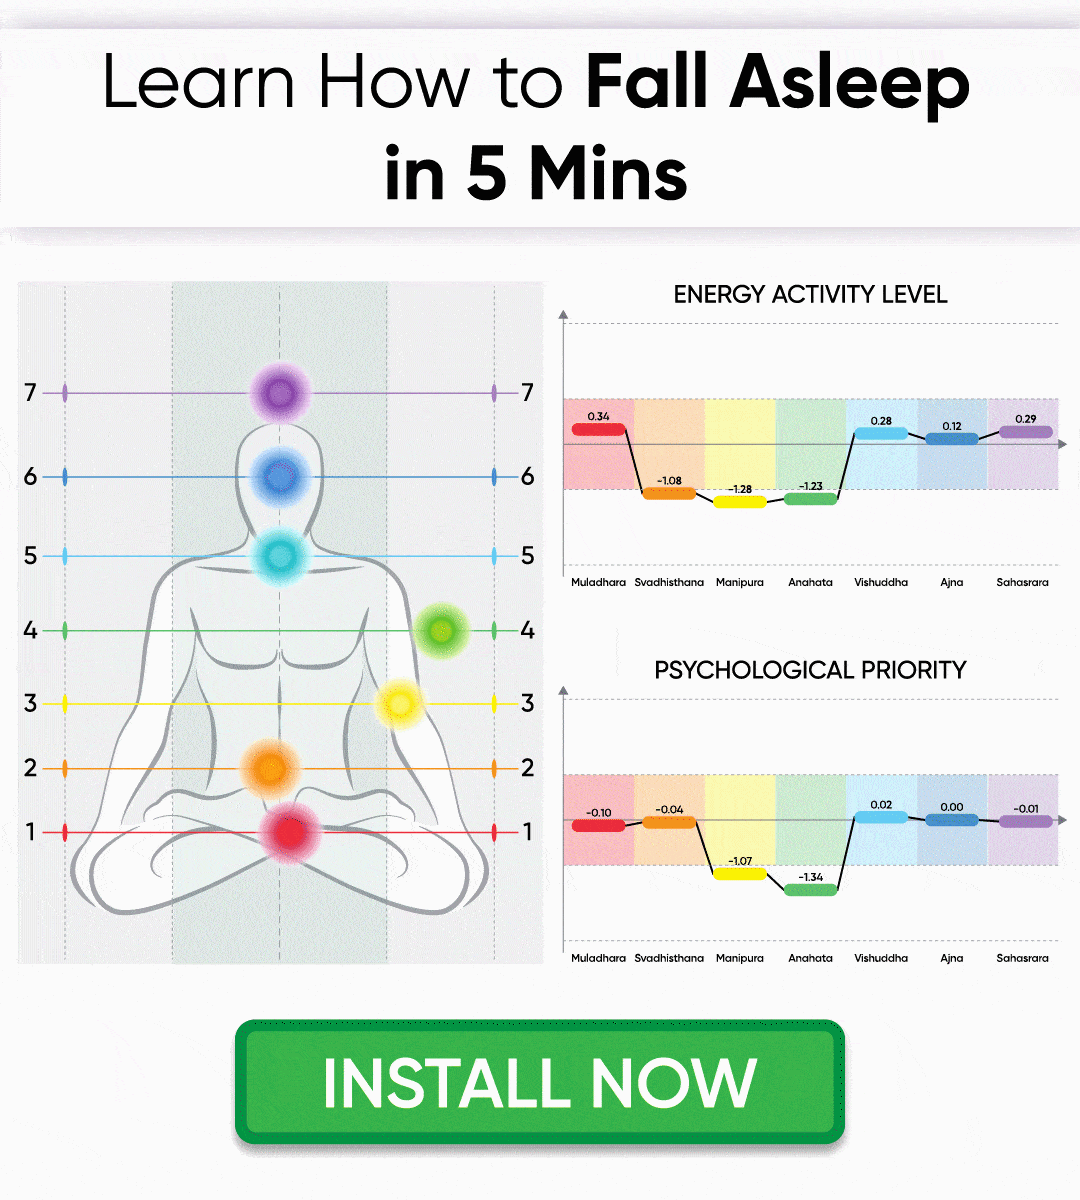 Learn How to Fall Asleep in 5 Mins